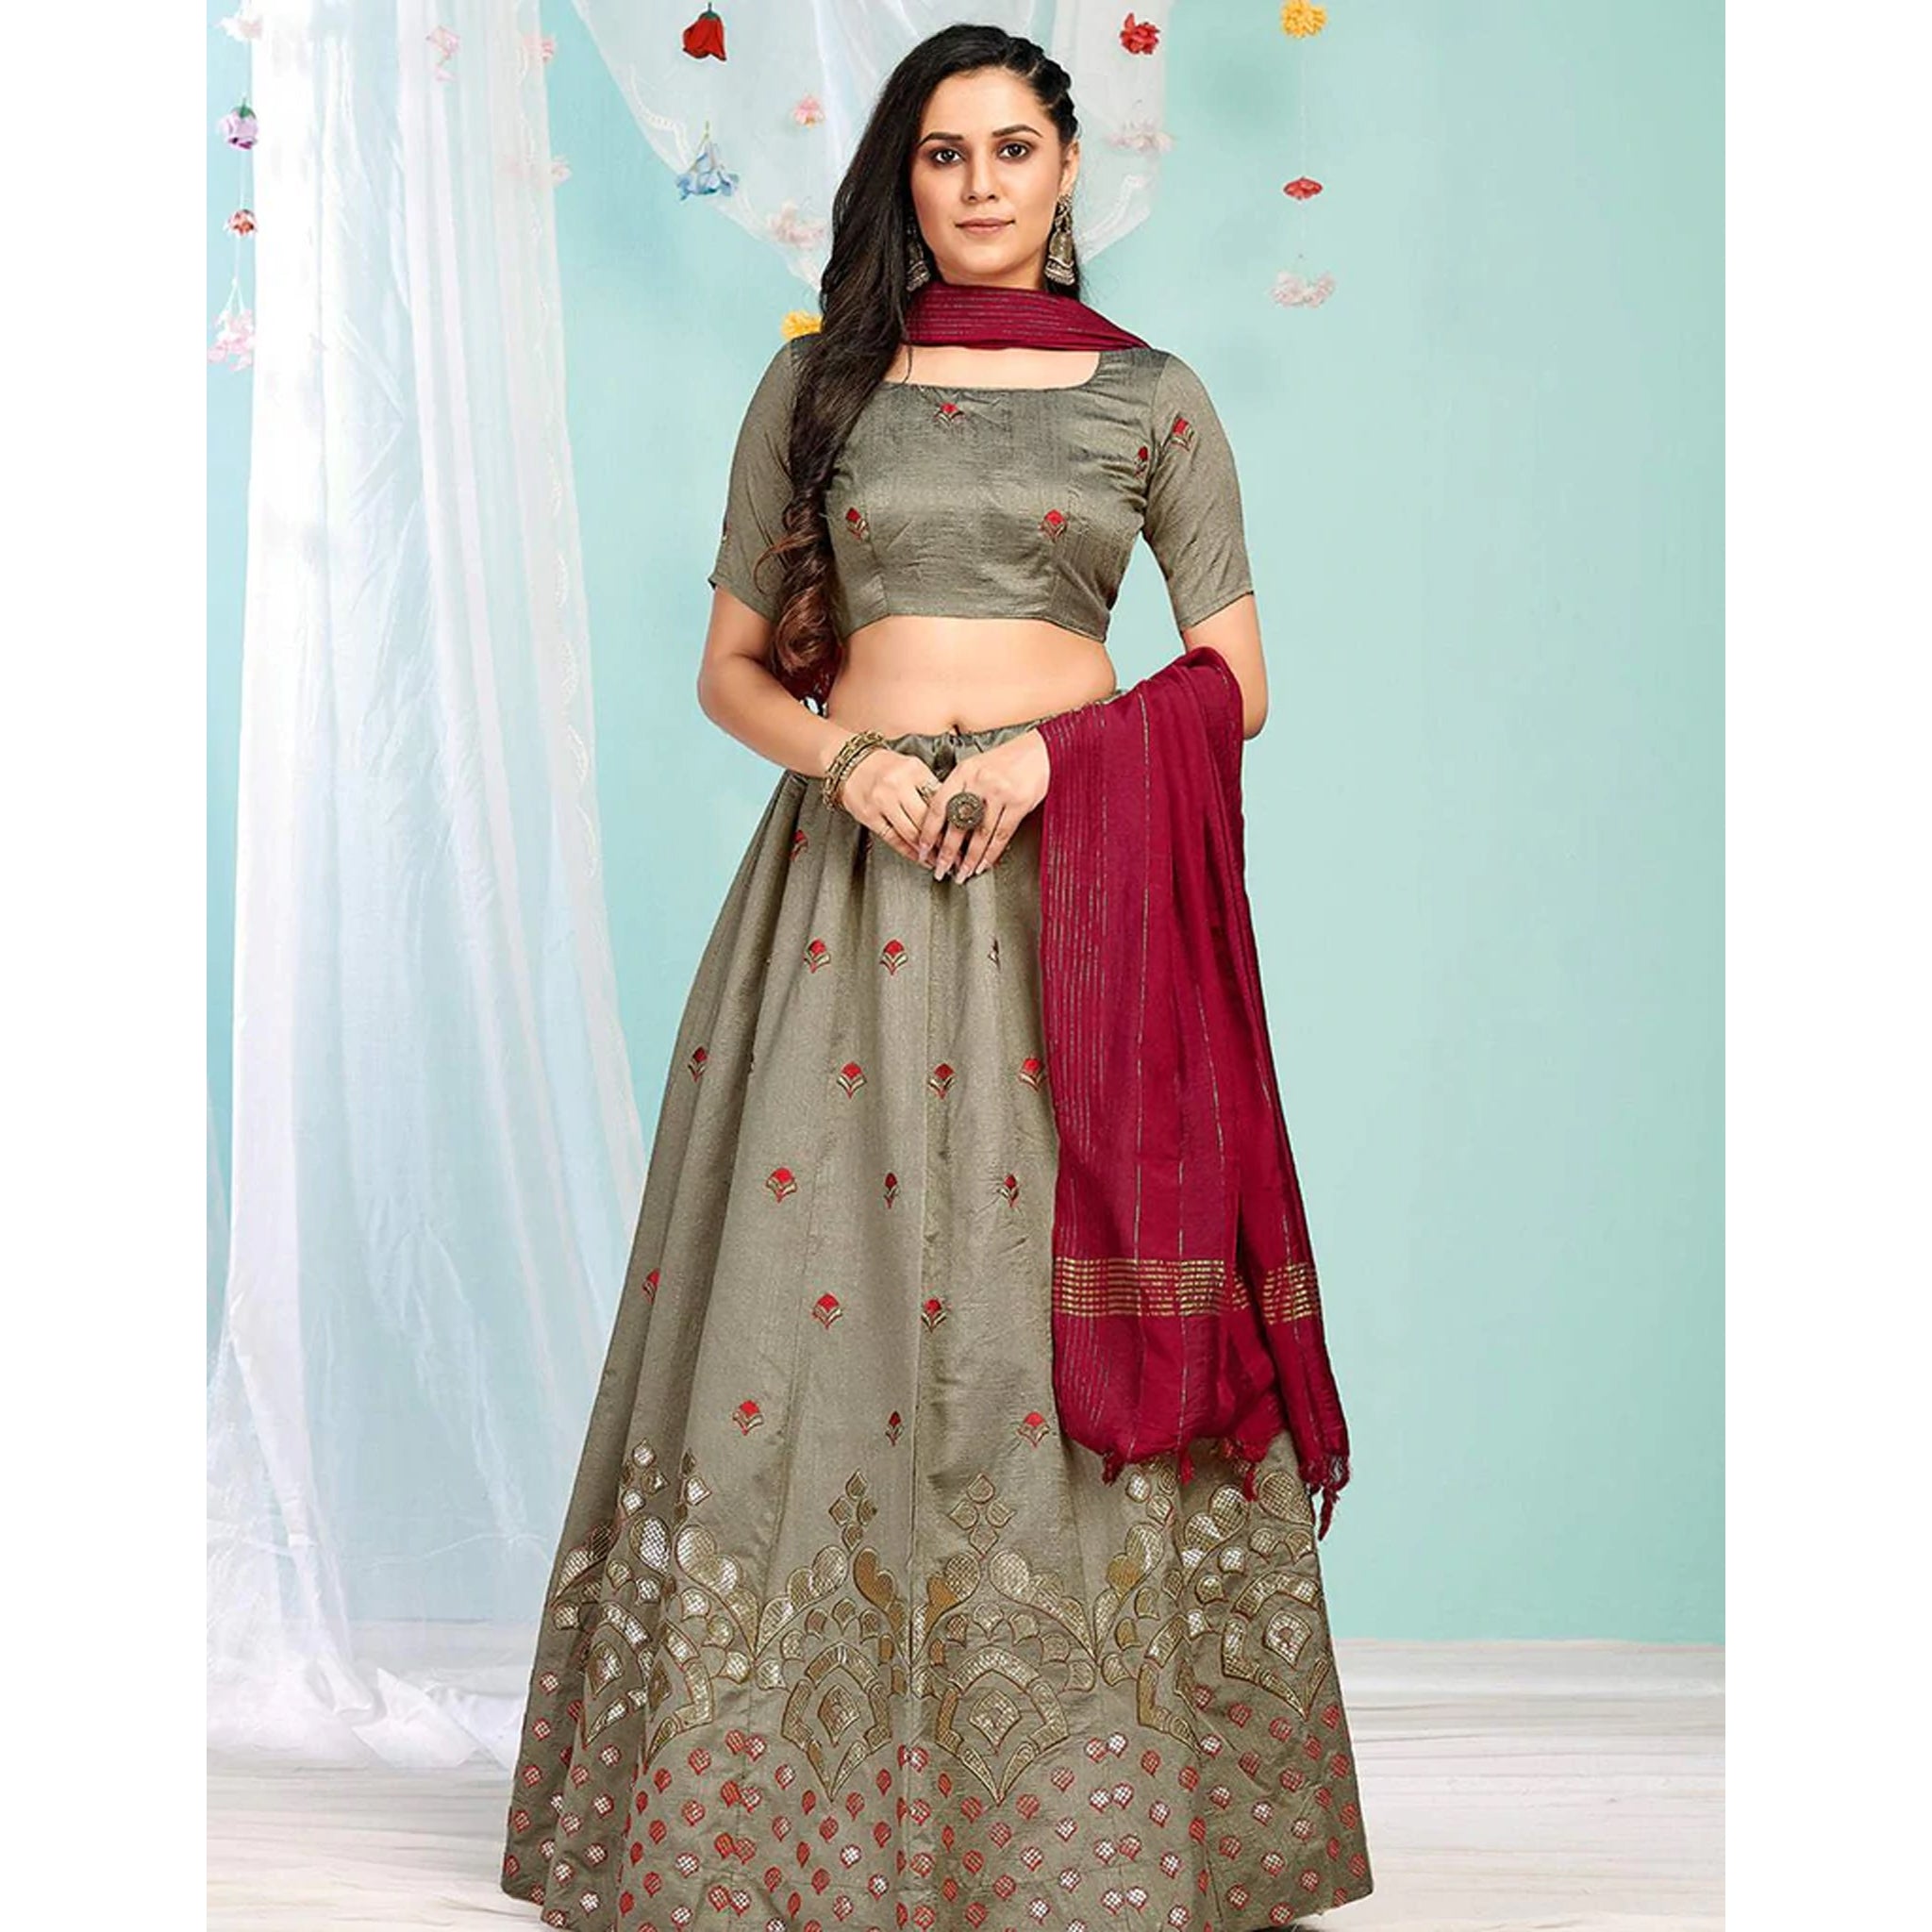 Buy SEER Cancan Skirt for Wedding Lehenga for Women - Can Can Skirt for  Gown Or Cancan Petticoat Underskirt for Lehenga Combo with red Skirt at  Amazon.in